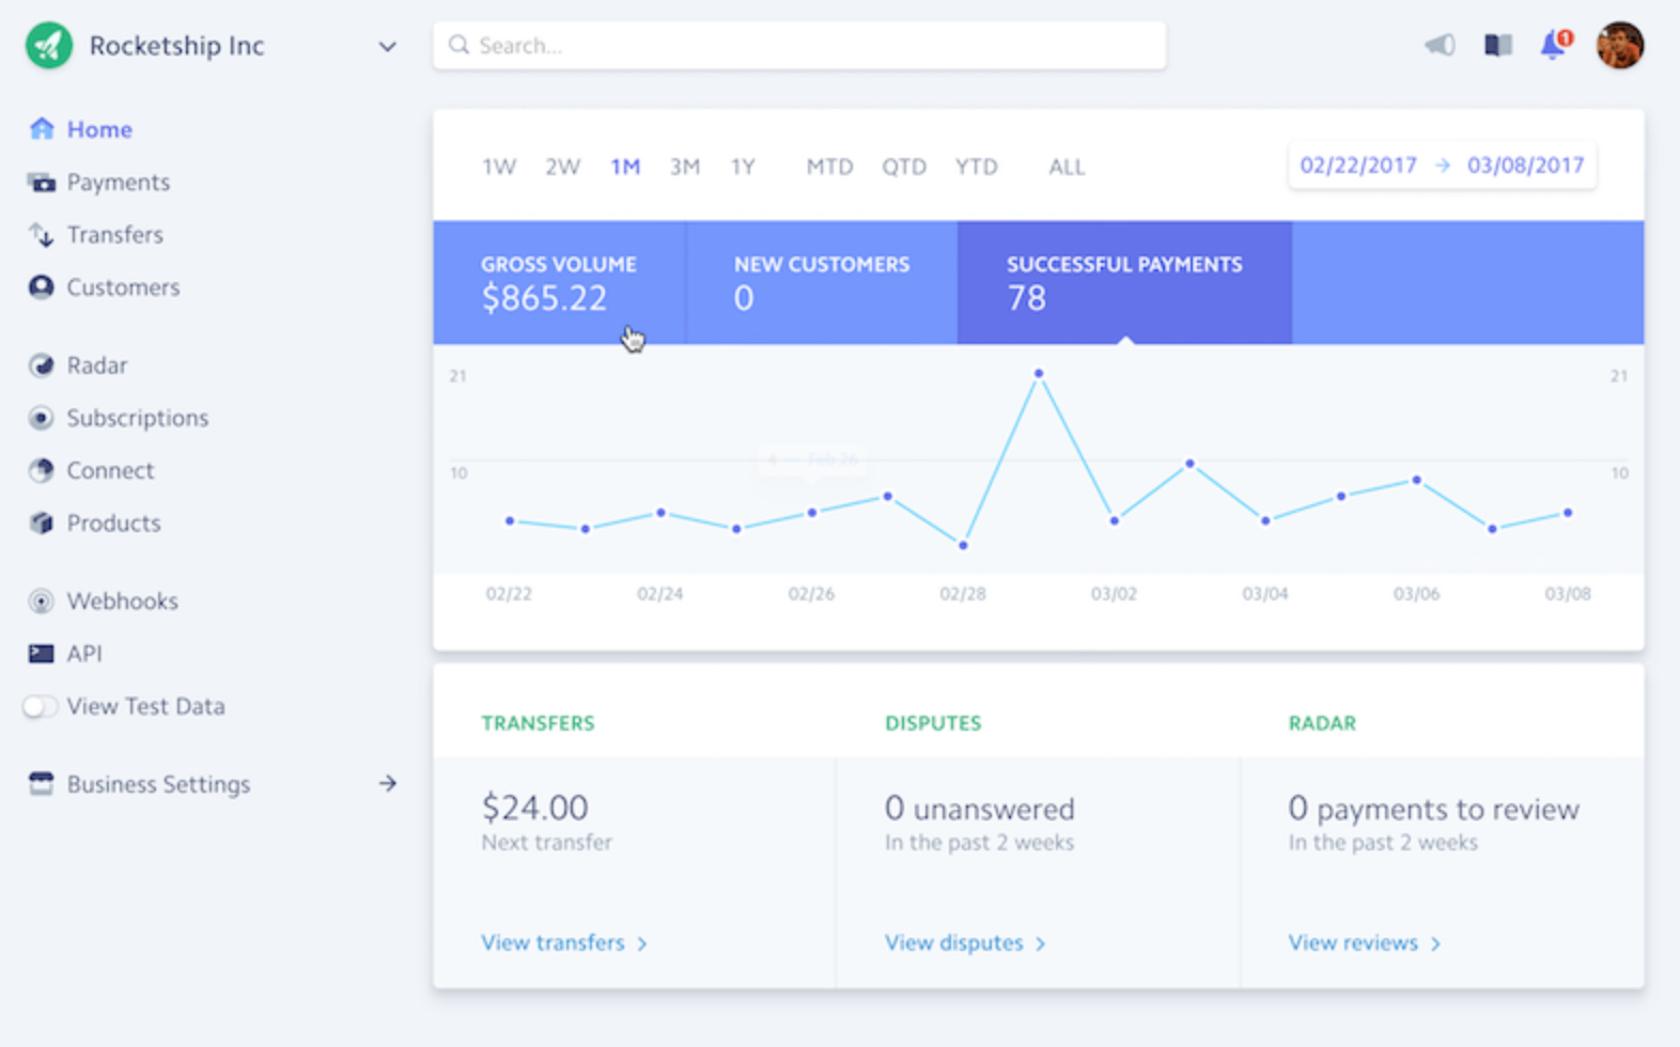 A user dashboard that shows a great visual display of data